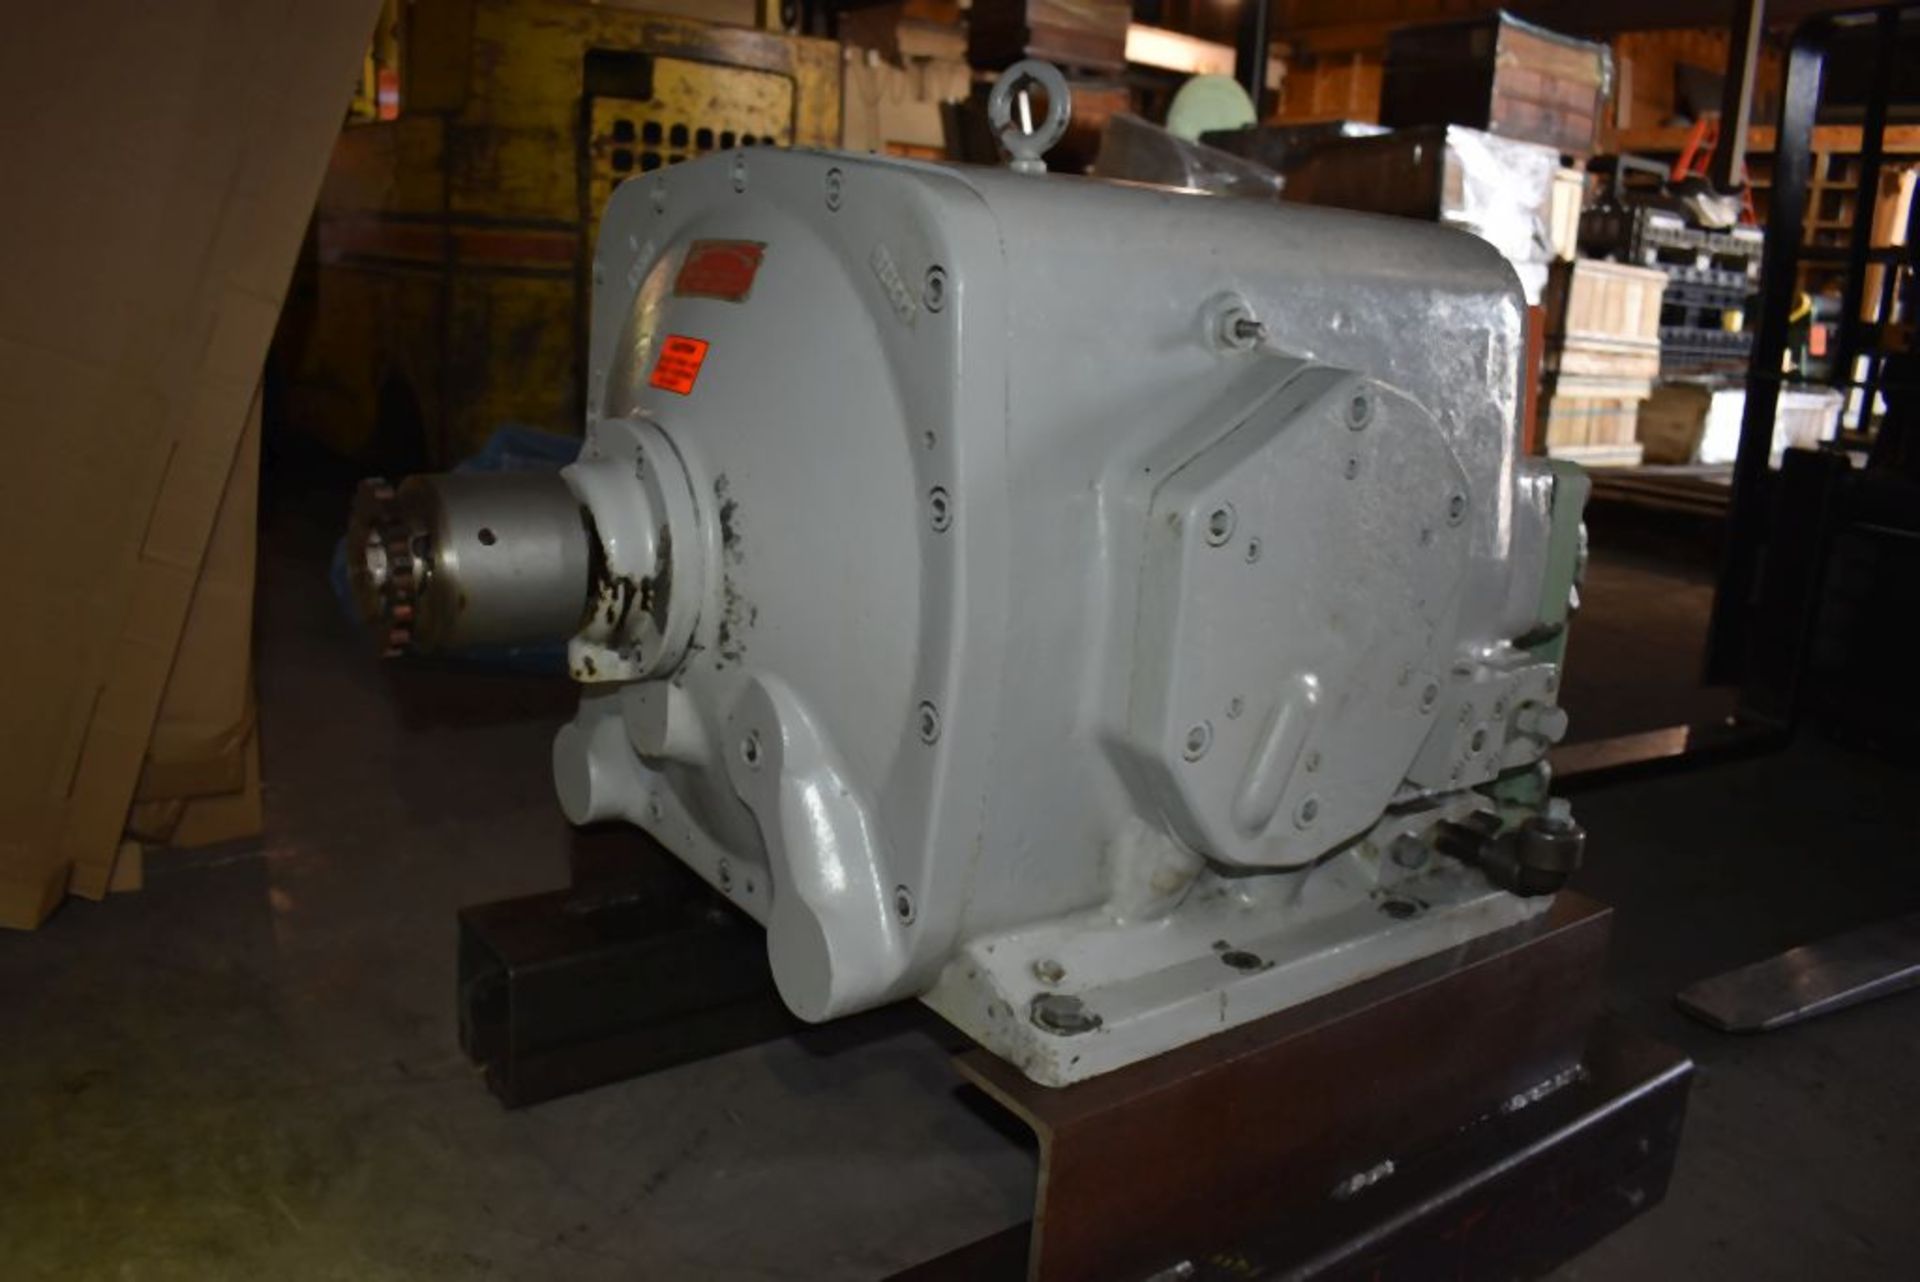 RACINE HYDRAULIC PUMP, OILGEAR, TYPE DH-6025, S/N: 38169, RATED PRESSURE 2500, RPM 900 - Image 4 of 7